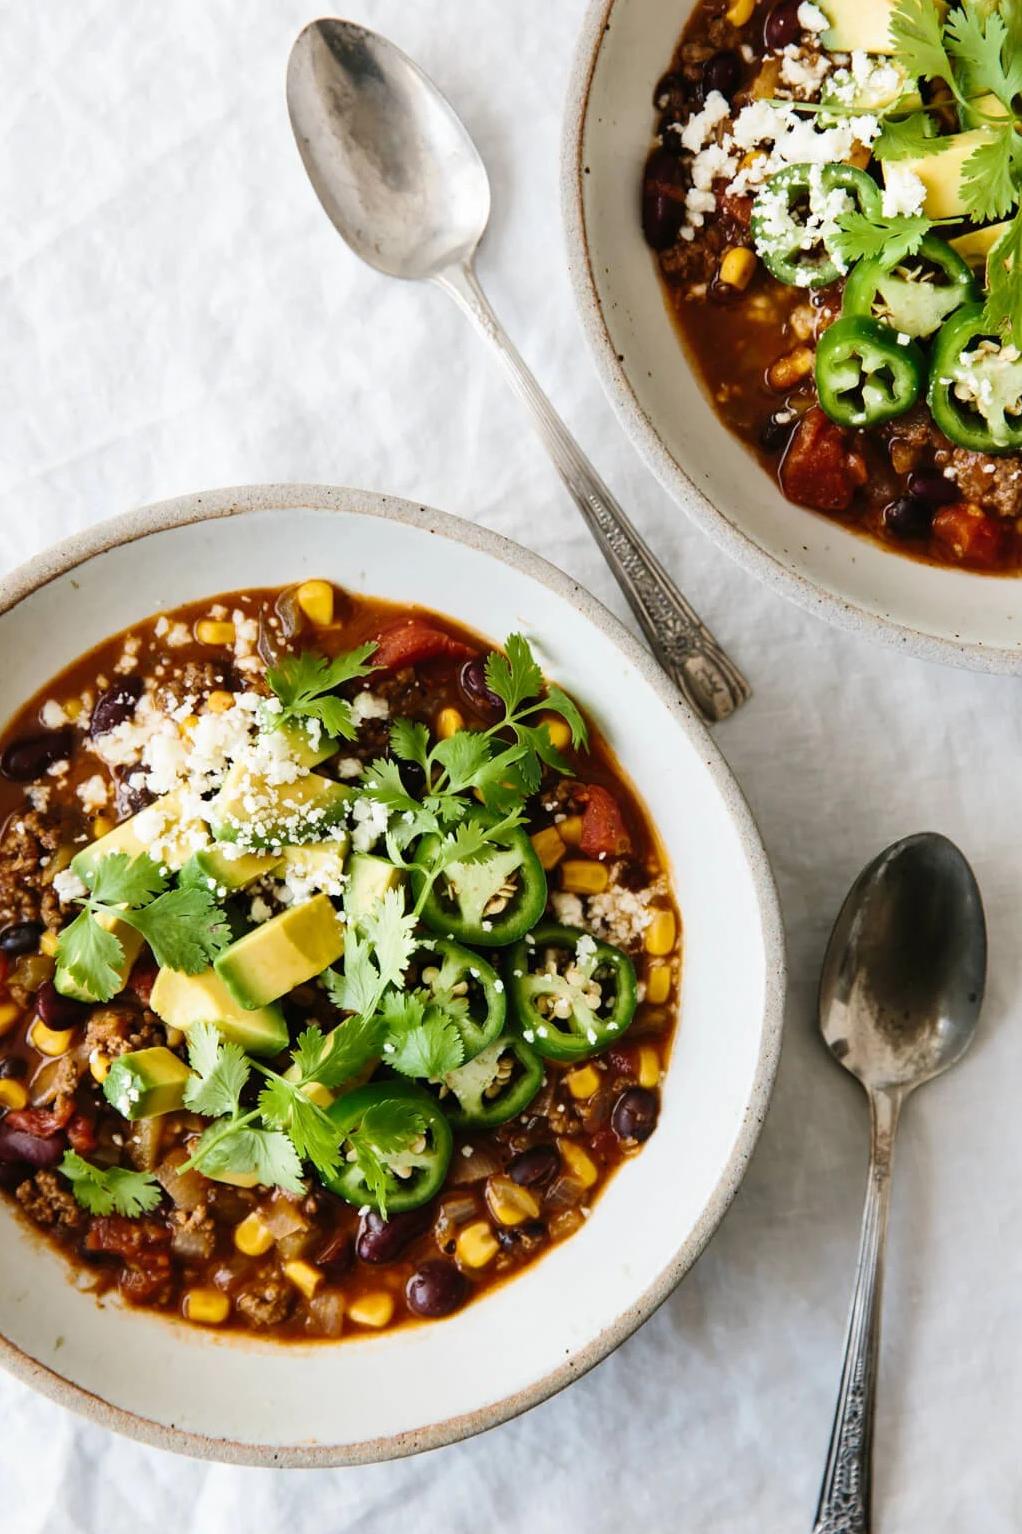  Spice up your day with this delicious and gluten-free taco soup! 🌮